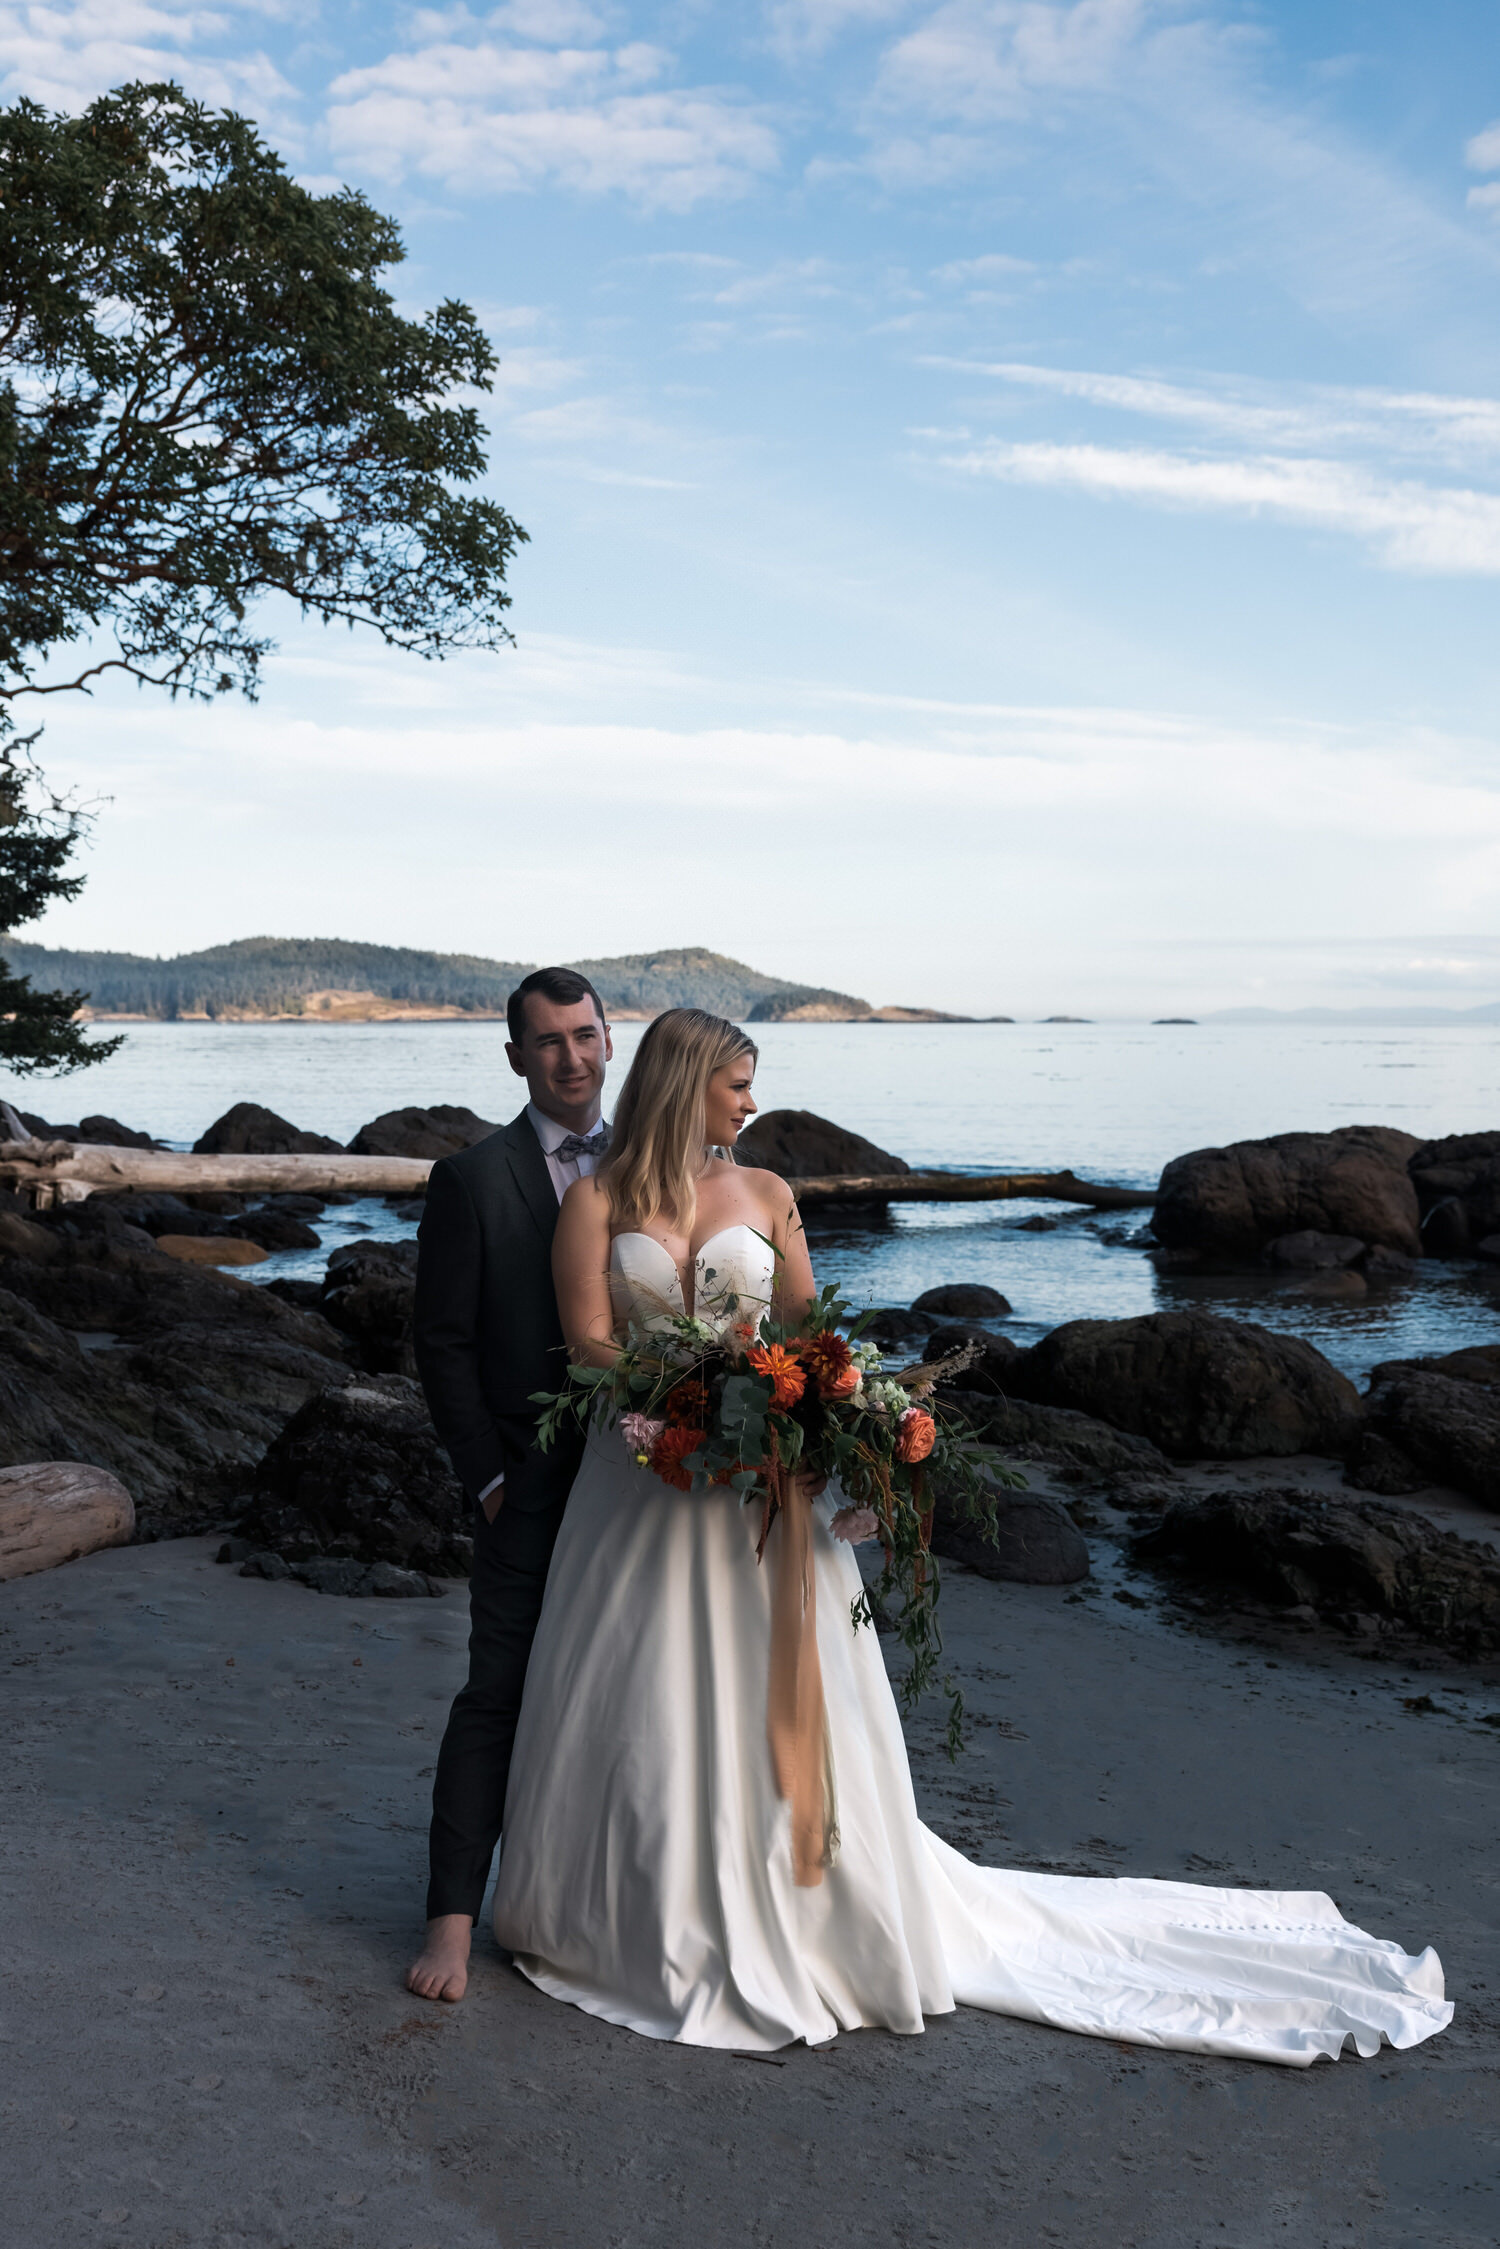 Vancouver Island Adventure Elopement and Small Wedding Photographer - Allie Knull's Photography-63.jpg